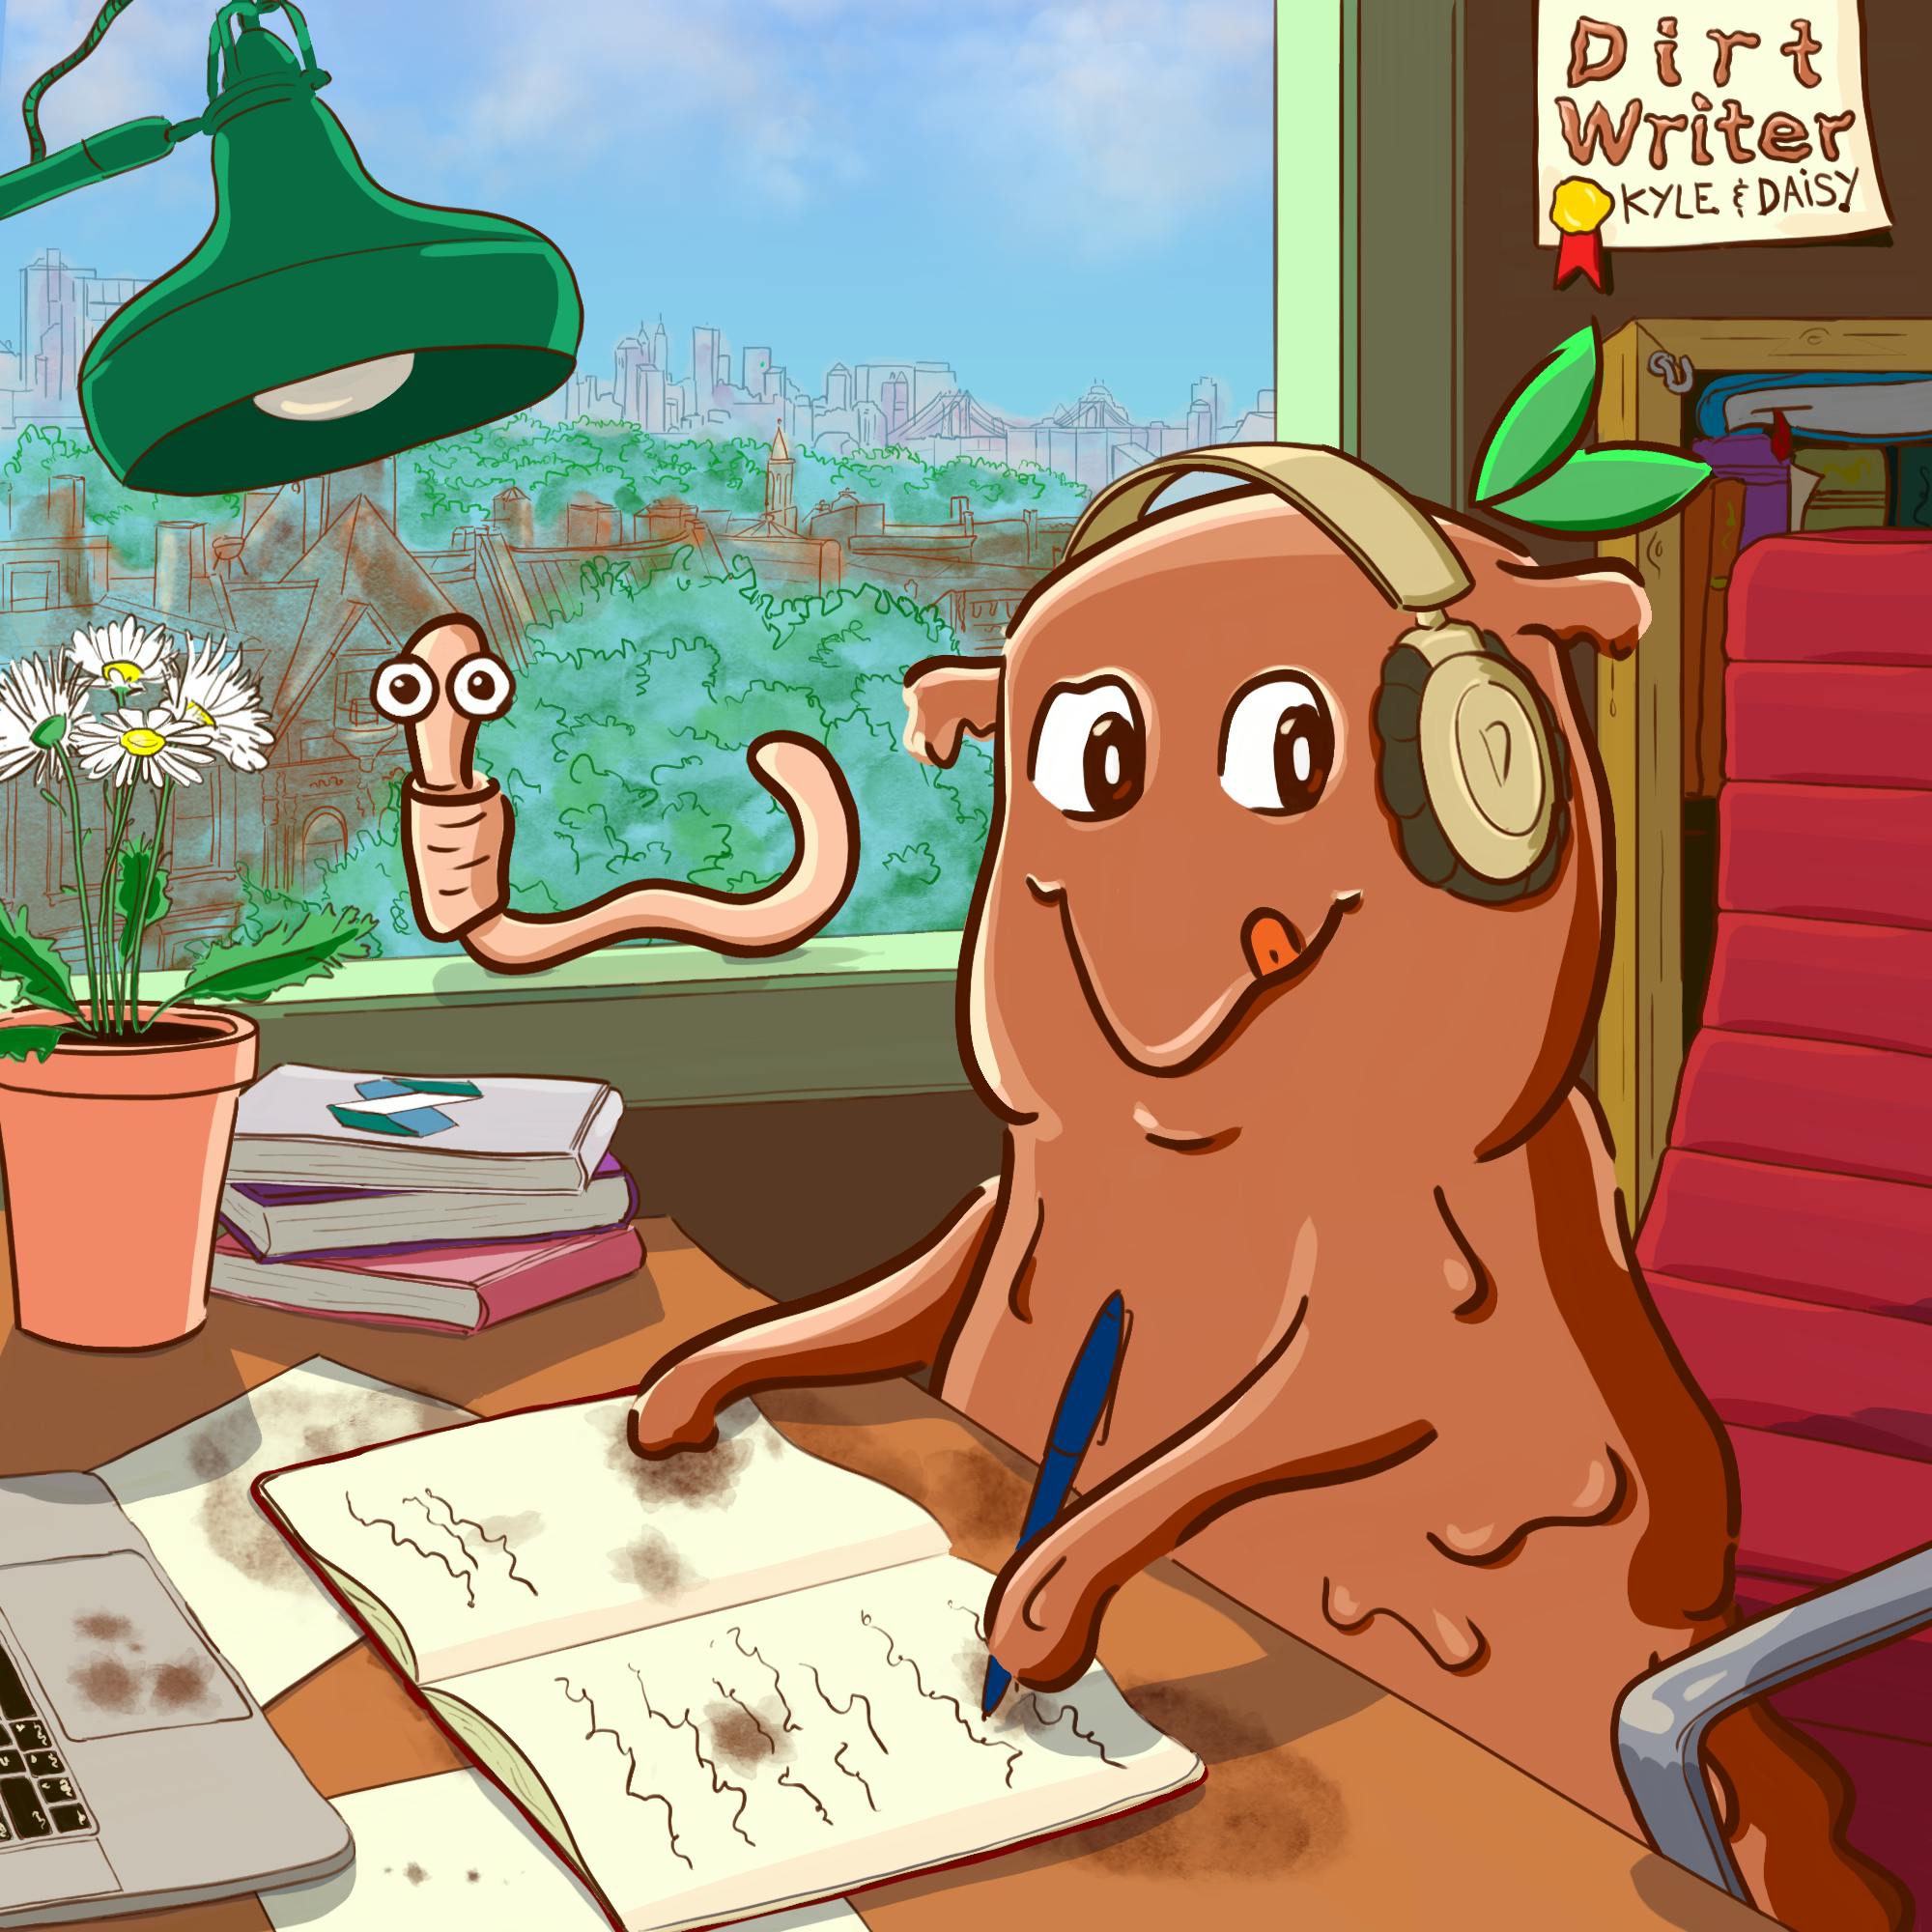 Image of a Dirt DAO NFT. [In image] Dirt mascot writes in a dirty notebook with a worm on the window sill.